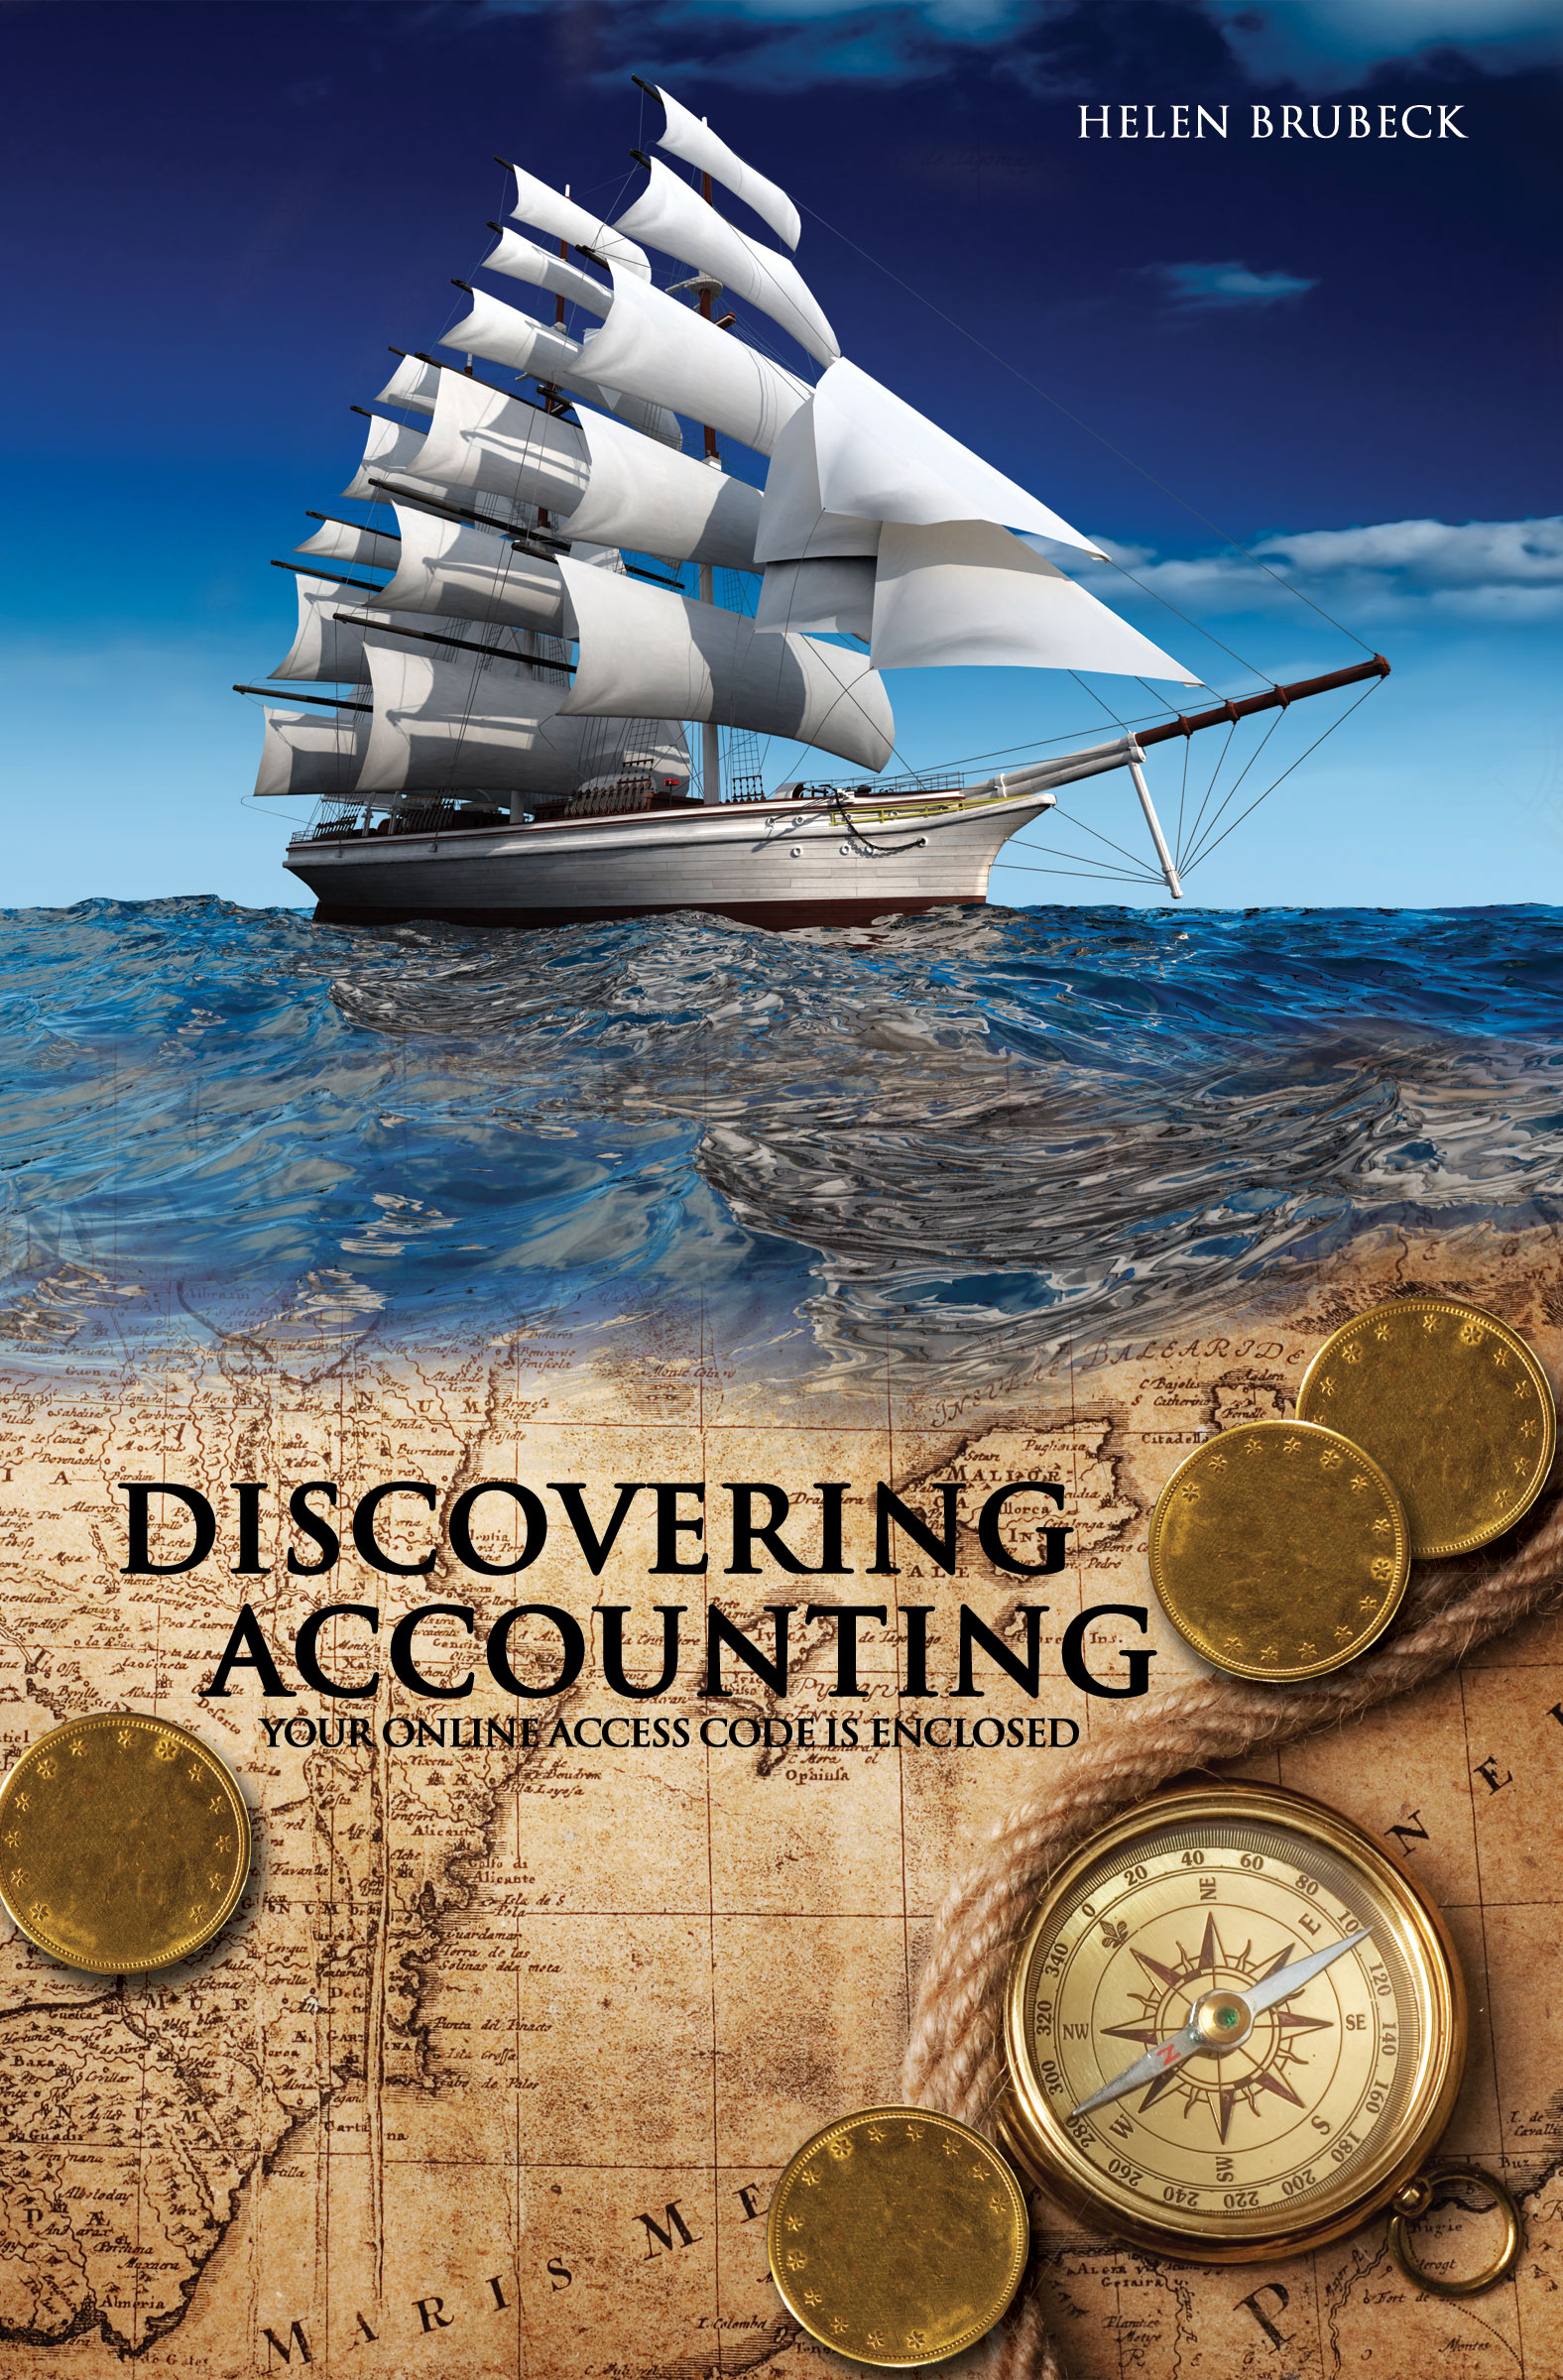 Discovering Accounting - ecommerce